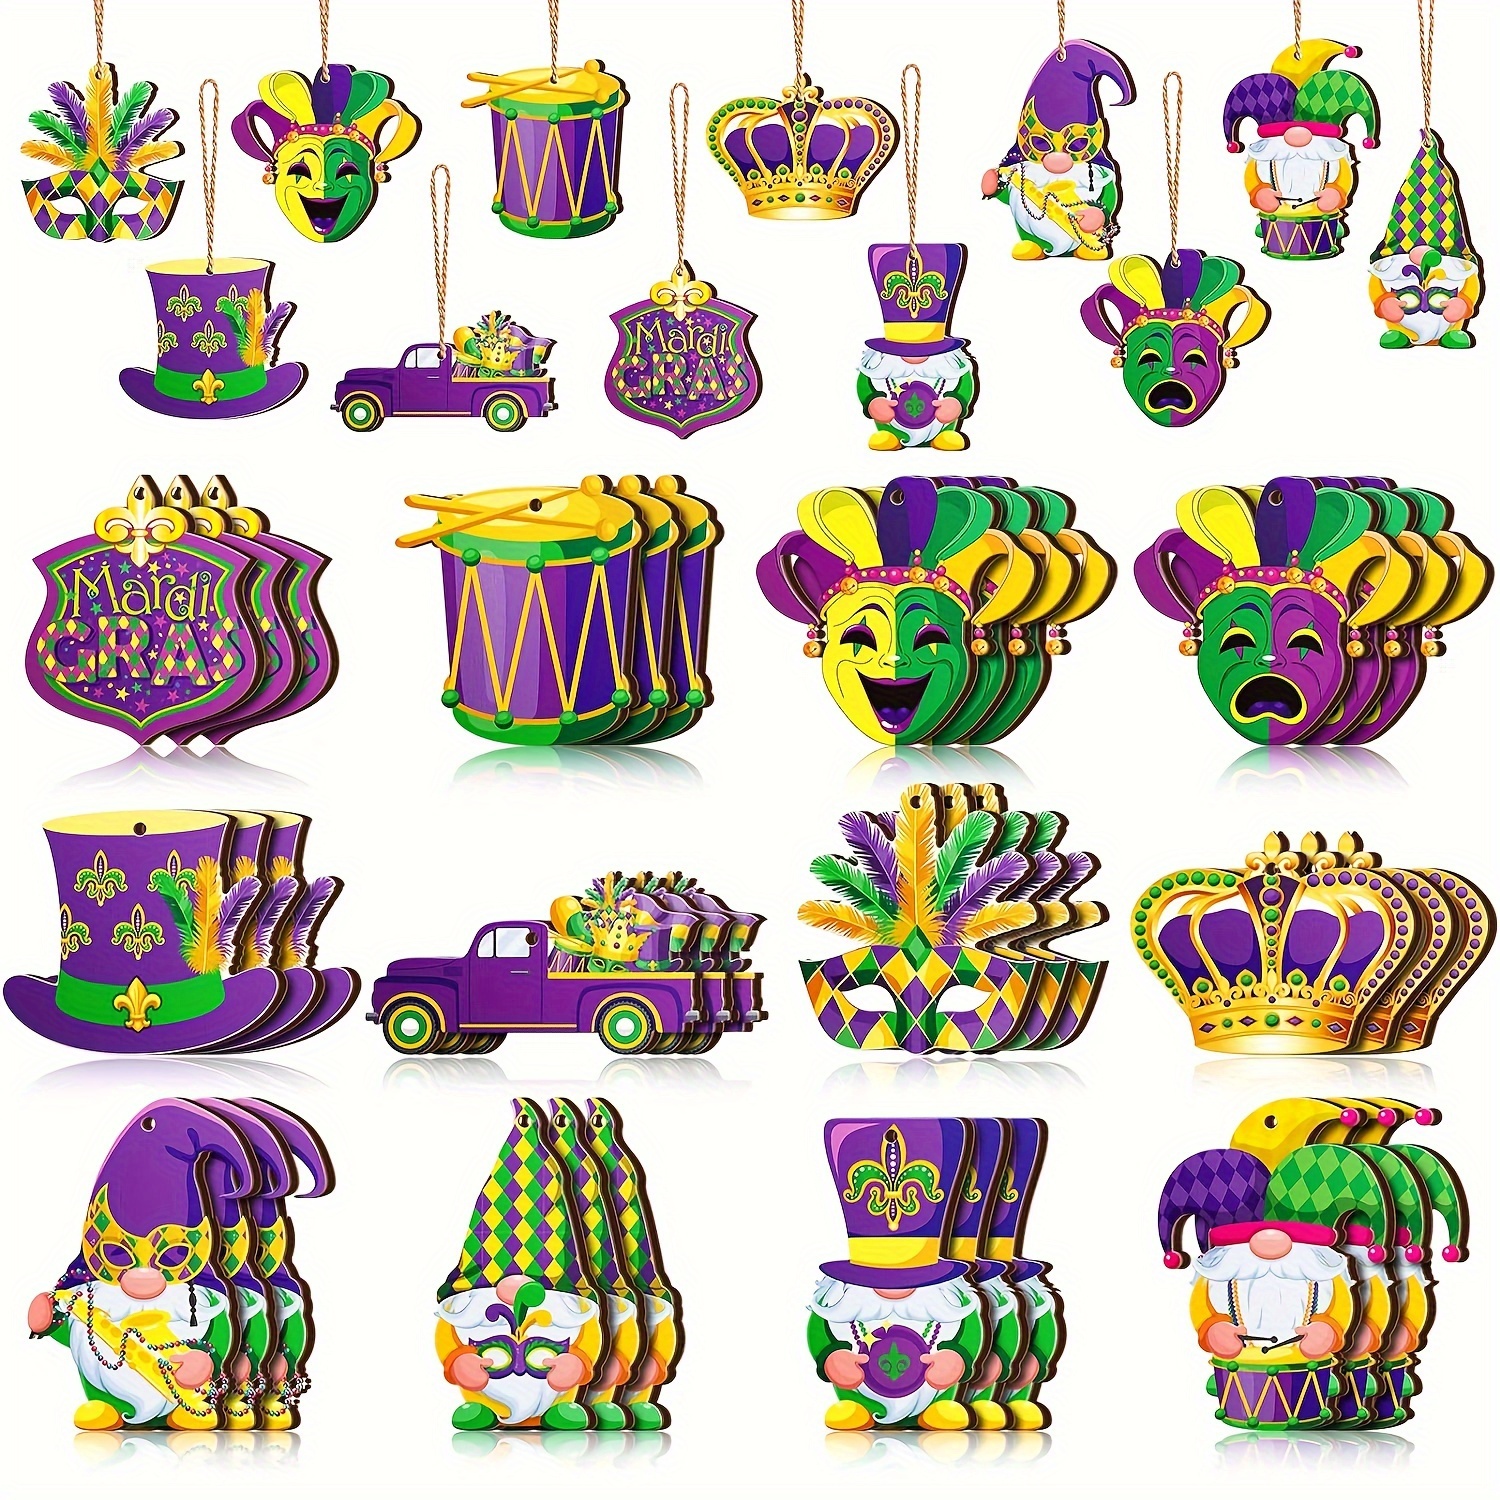  Mardi Gras Ball Ornaments Purple Green Yellow Carnival Tree  Ornament, Mardi Gras Decorations Sequin Ball for Carnival St. Patrick's Day  Party Hanging Decor (Stylish Style, 12 Pieces) : Home & Kitchen